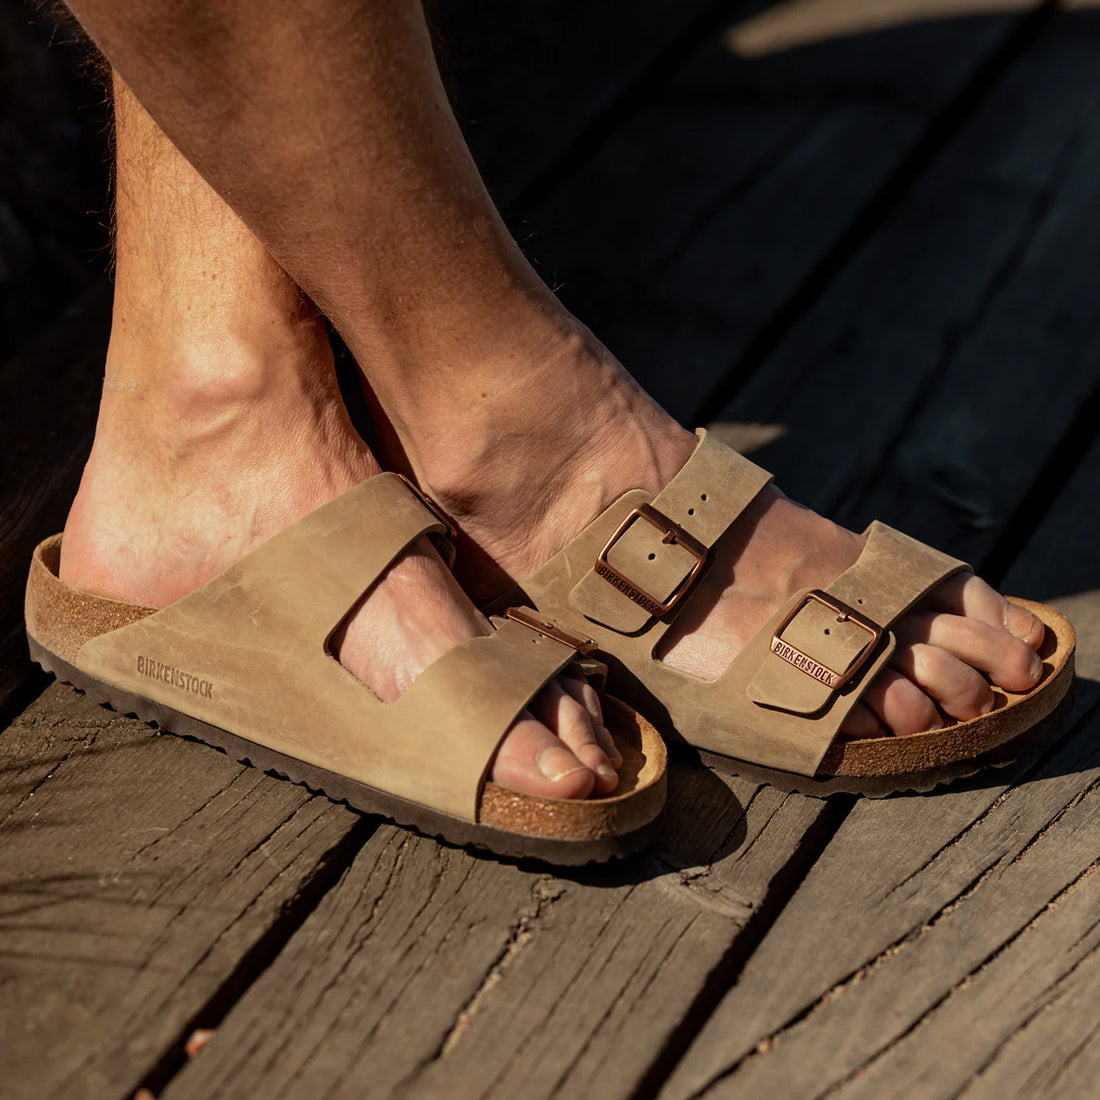 A pair of feet wearing birkenstock sandals on a wooden surface.